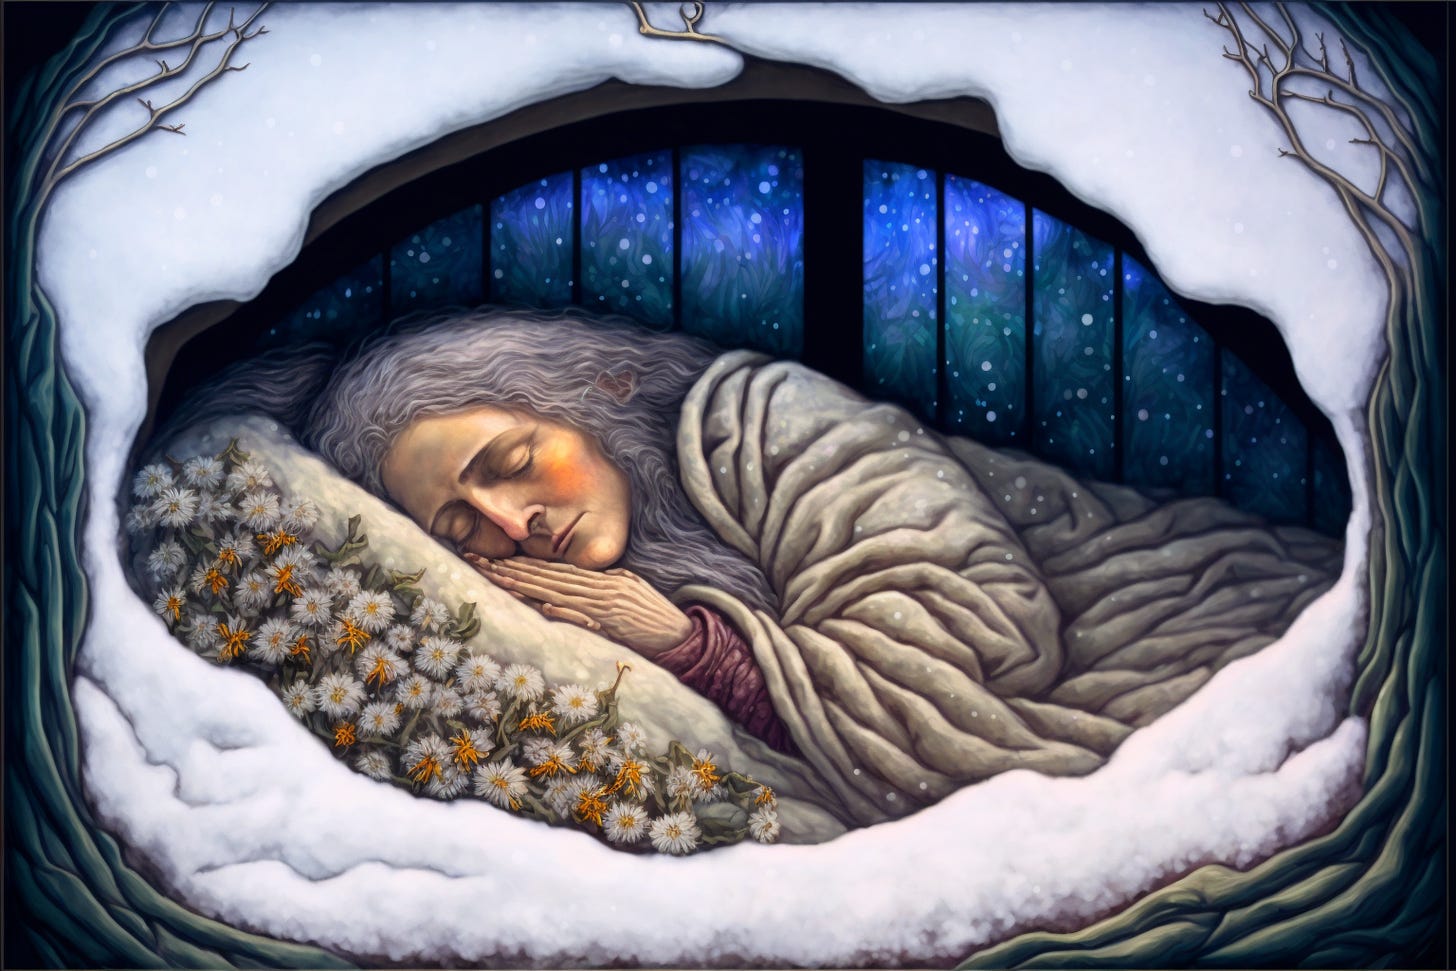 wise grandmother hibernating through the winter under a blanket of snow